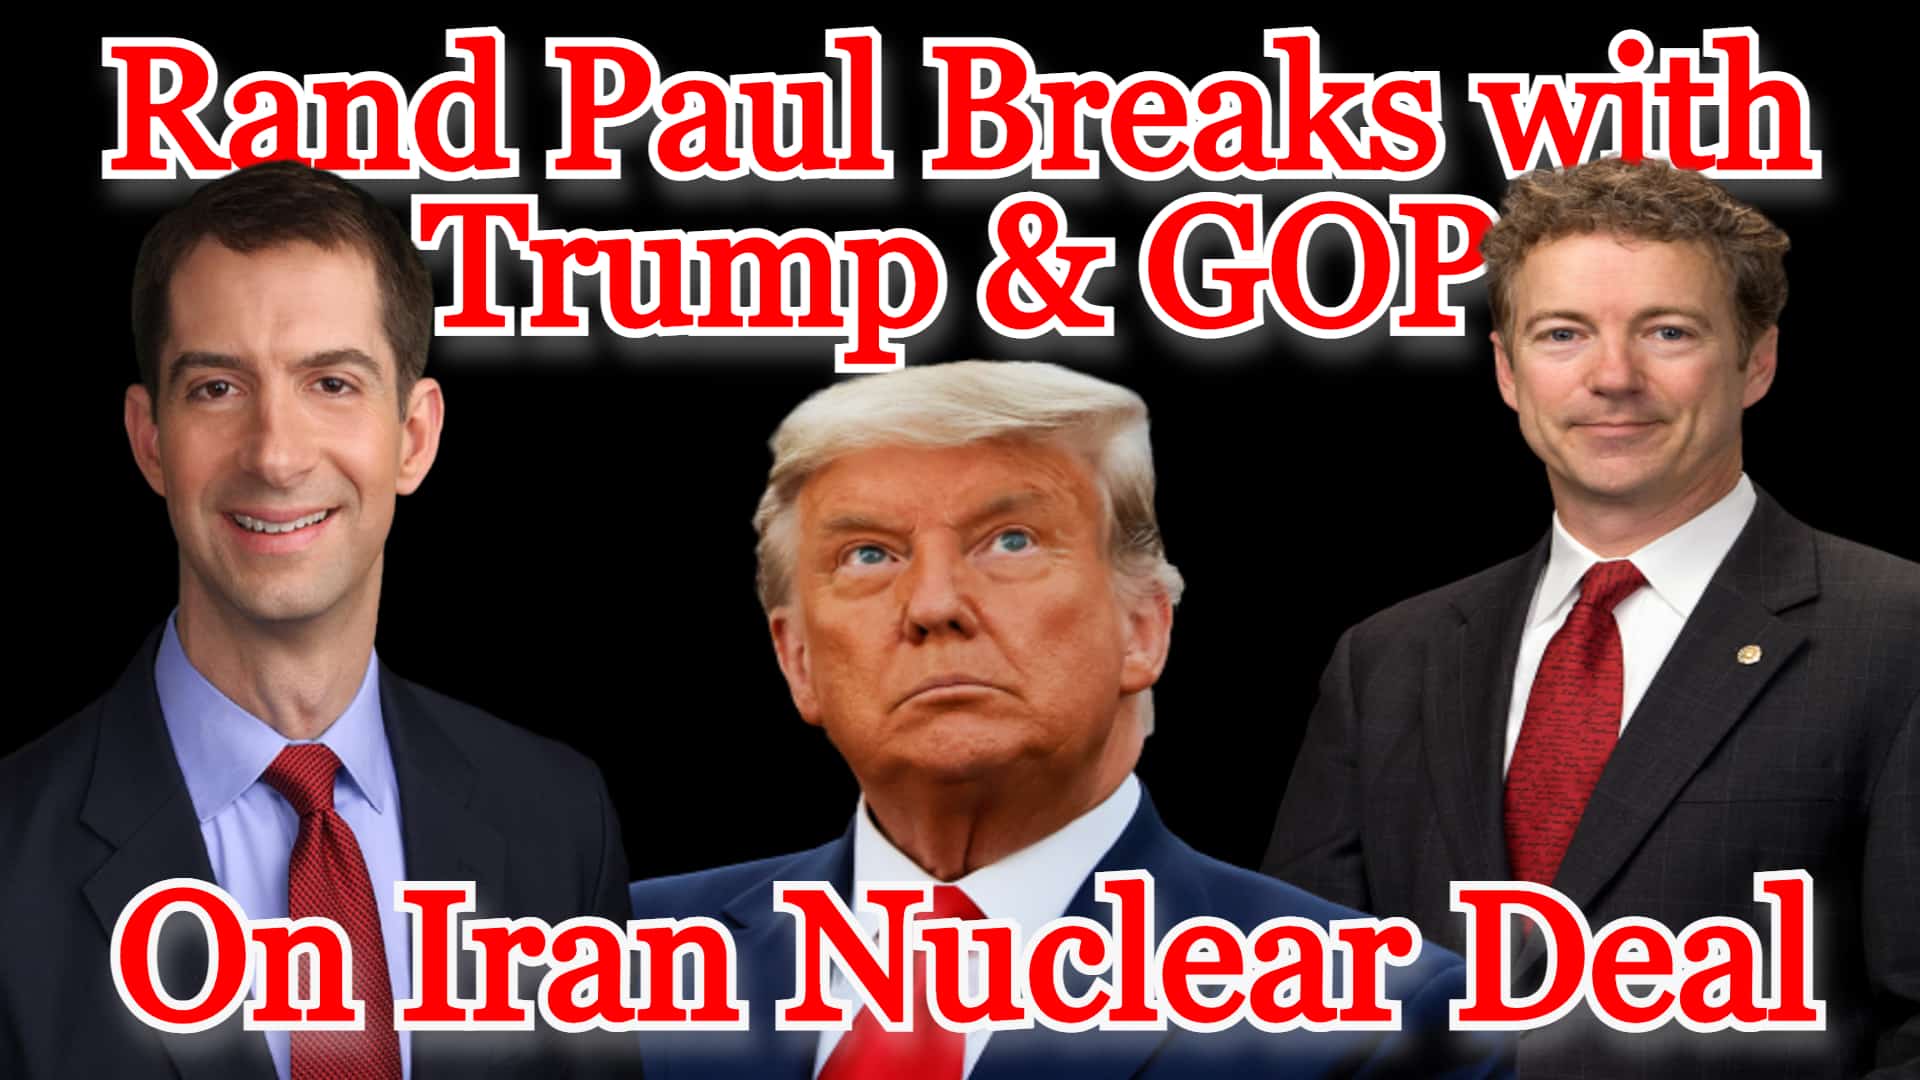 COI #251: Rand Paul Breaks with Trump, GOP on Iran Nuclear Deal